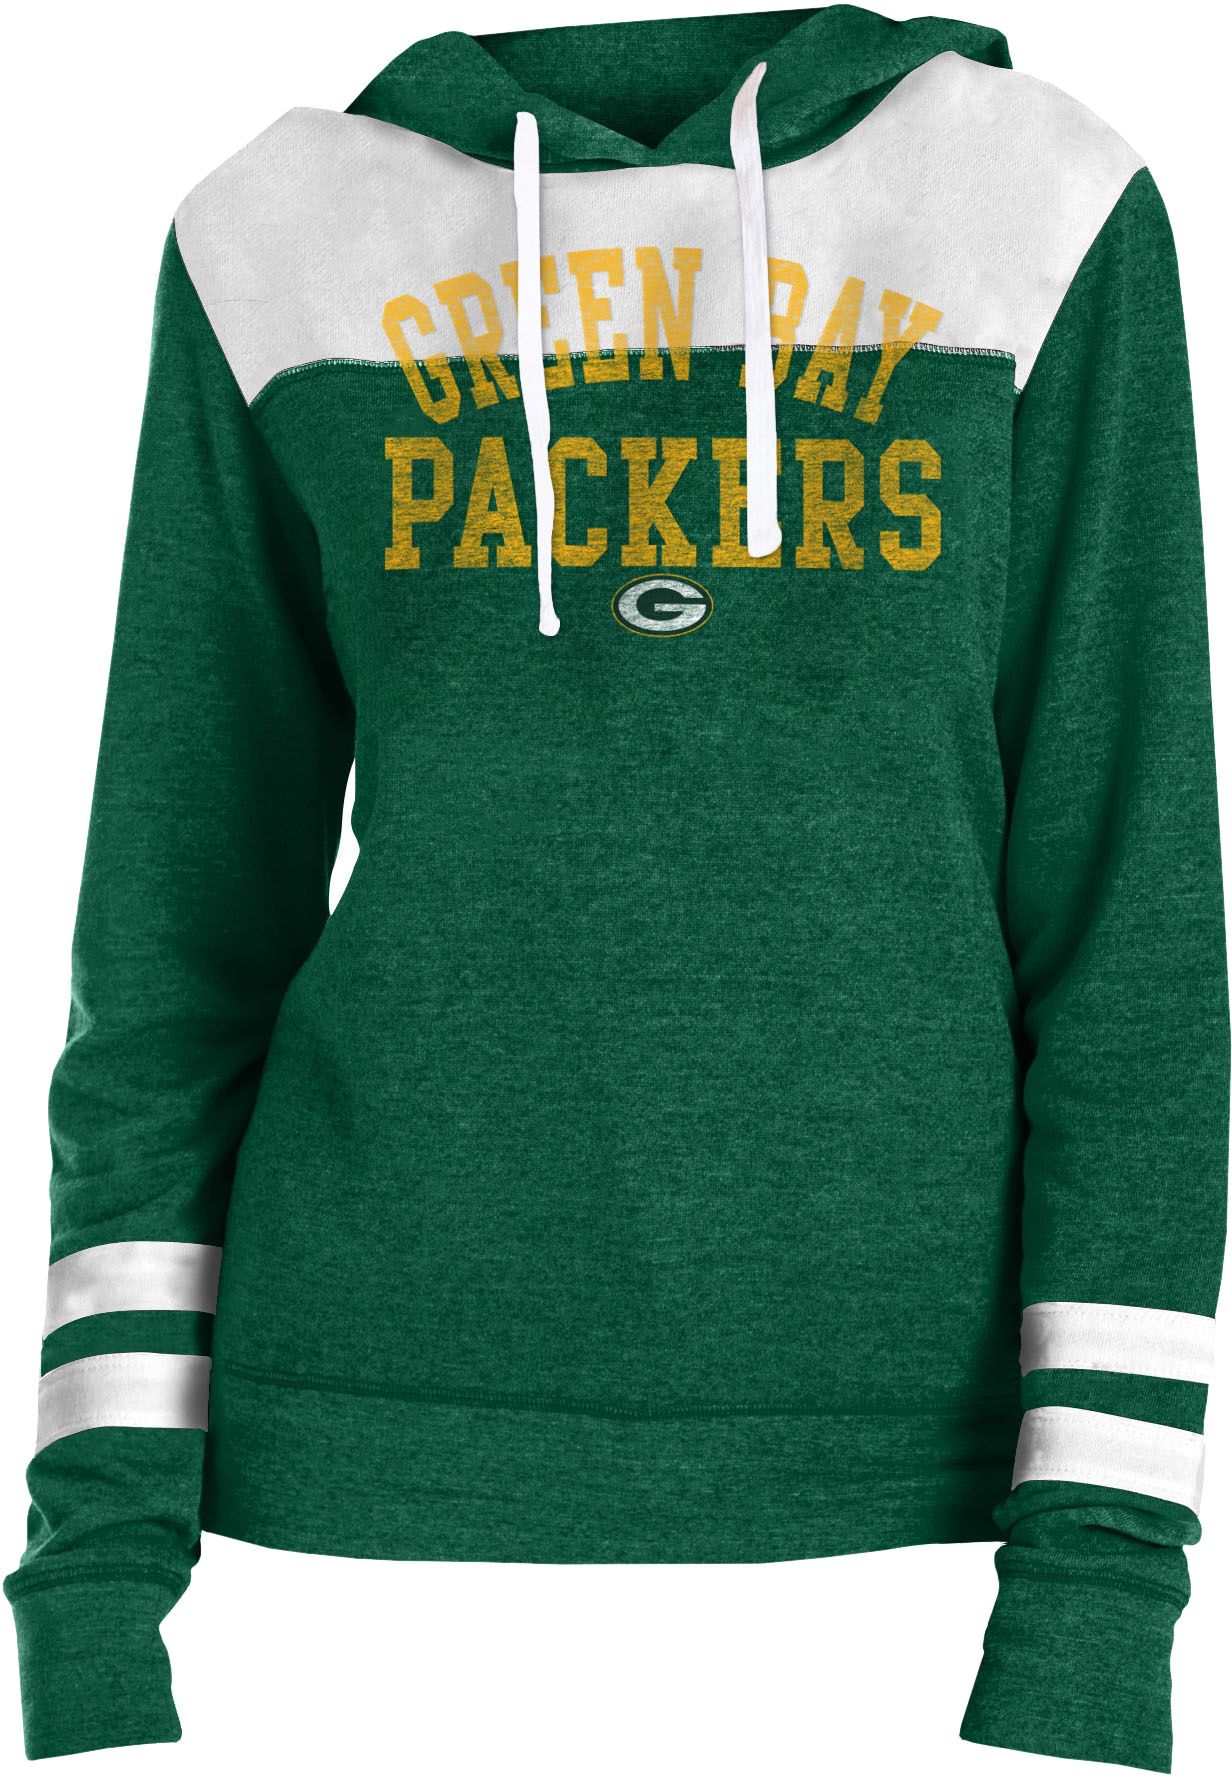 Green Bay Packers Apparel Gear Curbside Pickup Available At Dick S